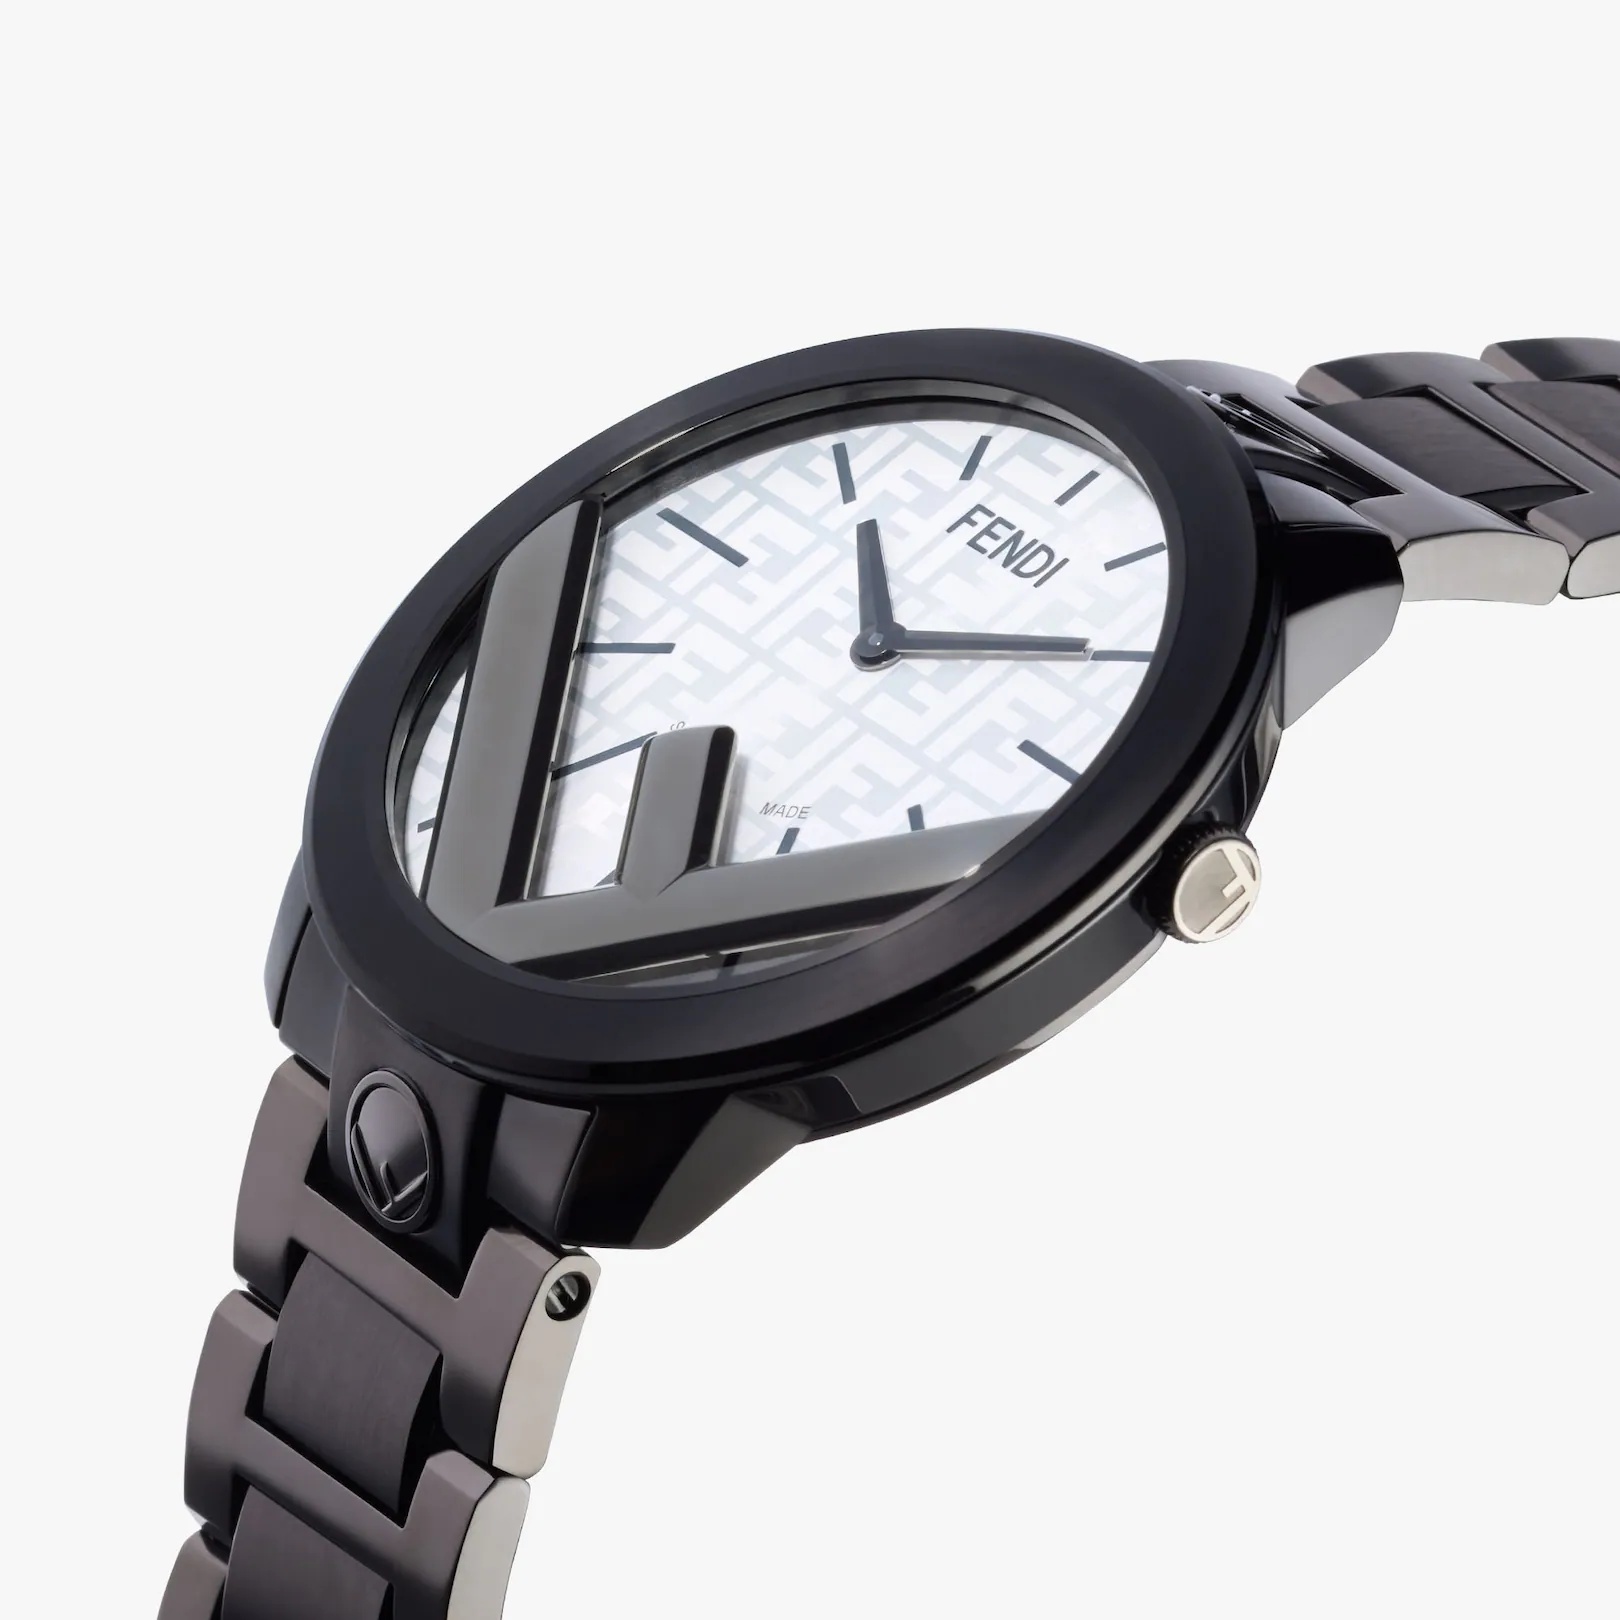 41 mm stainless steel round case with glossy and satin-finish black PVD coating, with tone on tone s - 2